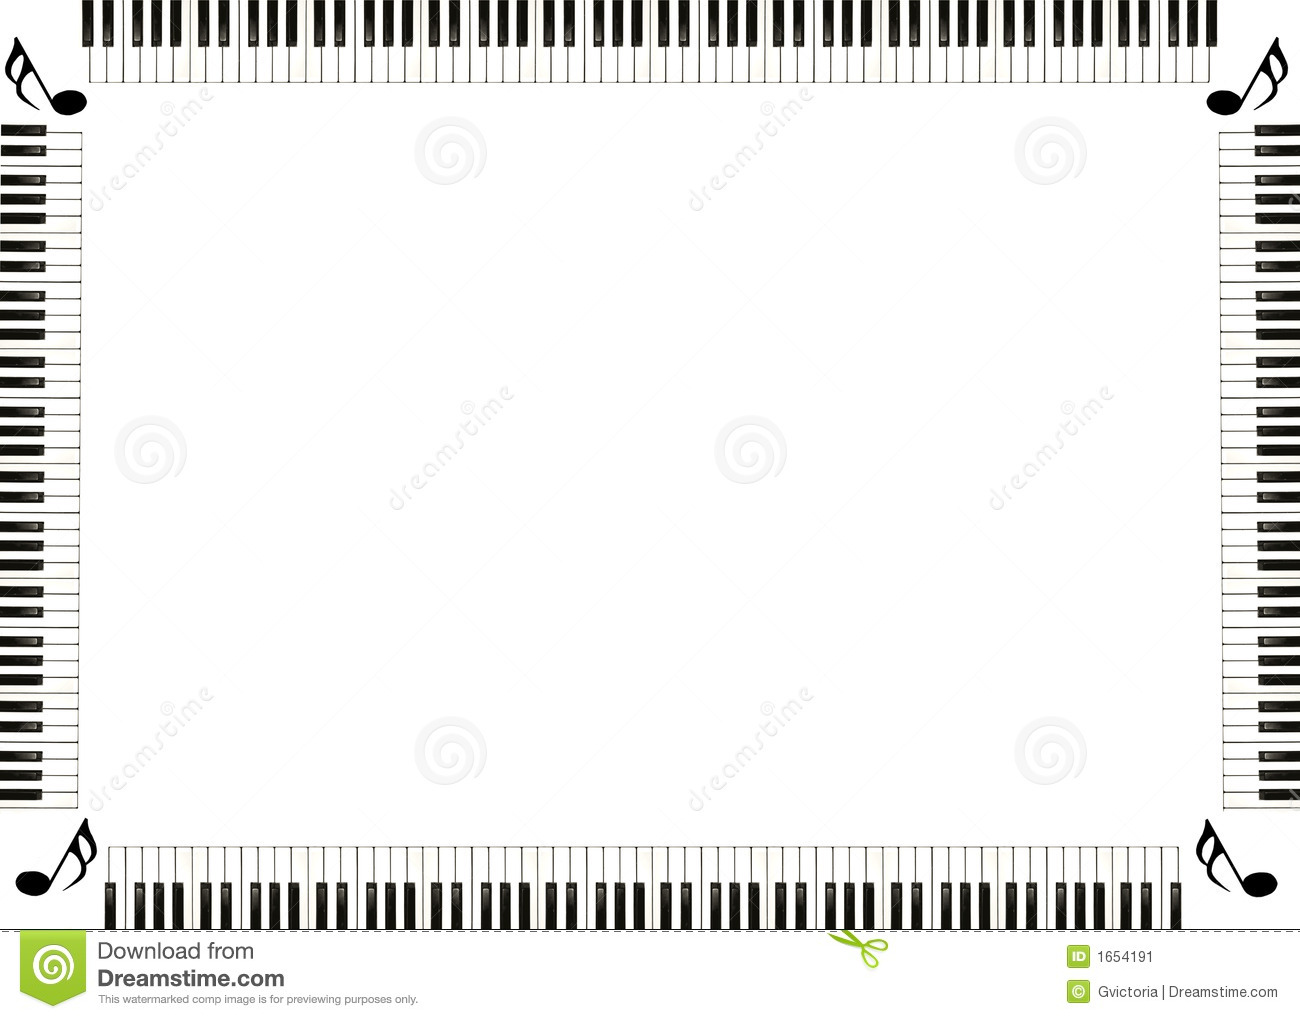 Music Note Border Clipart | Clipart Panda - Free Clipart Images